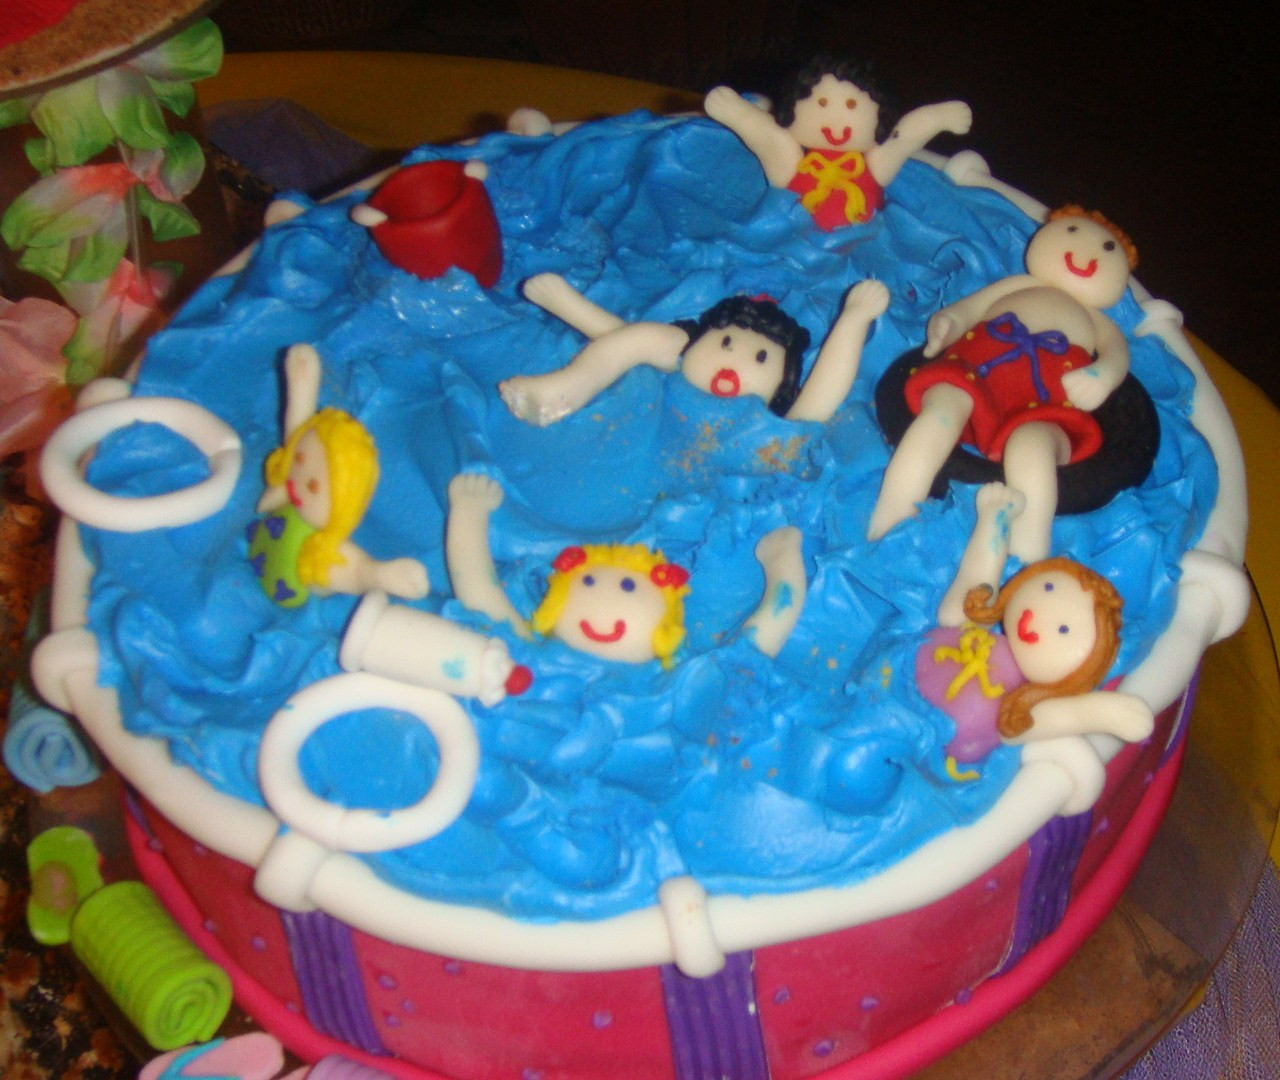 Pool Party Cake Ideas
 Ideas for a Cool Sunny Pool Party